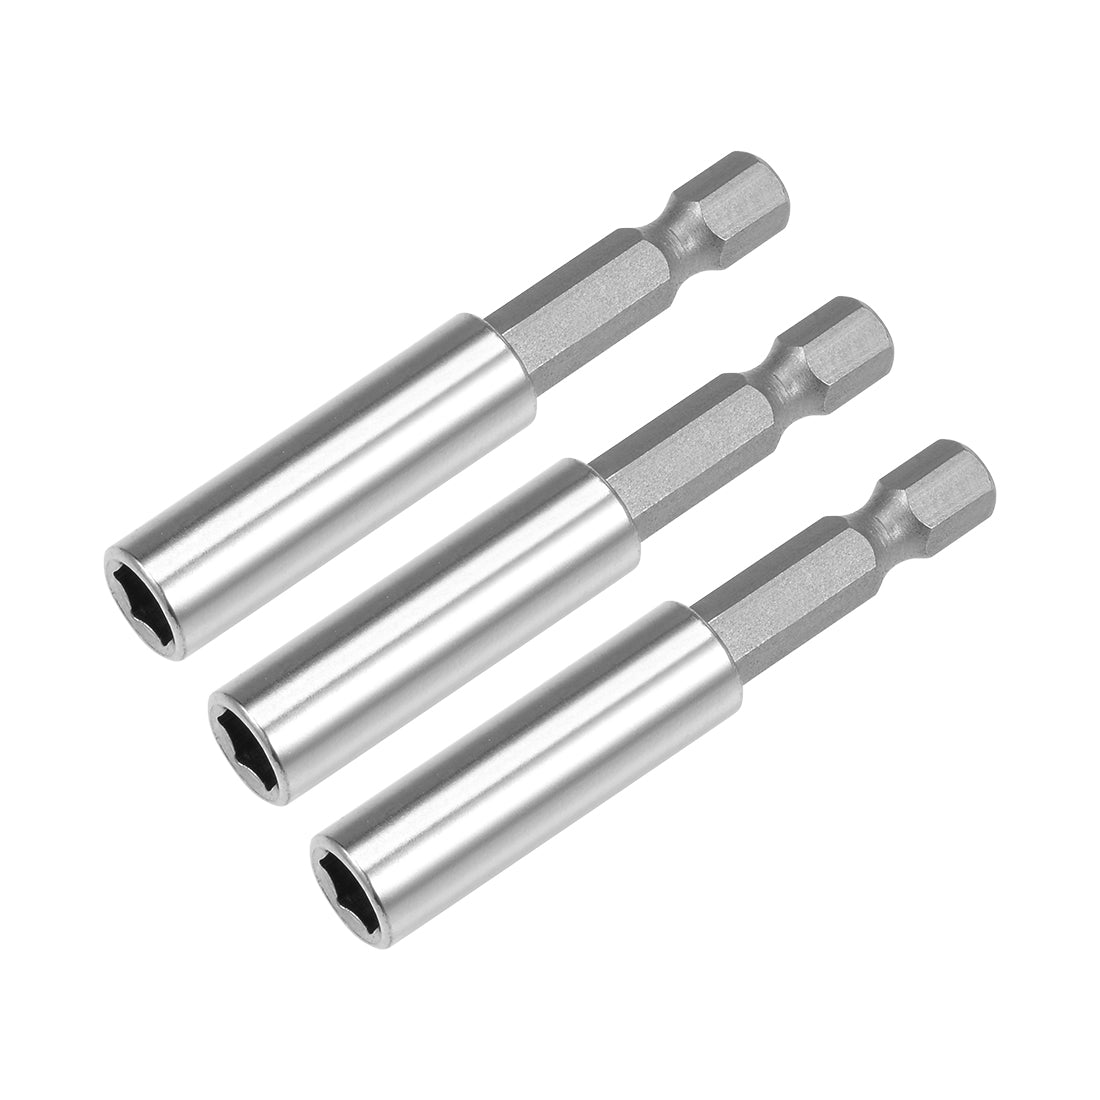 uxcell Uxcell 3 Pcs 1/4 Inch Hex Shank by 2.36 Inch Magnetic Bit Holder Extension, Quick Release Screwdriver Drill Bit Power Tool